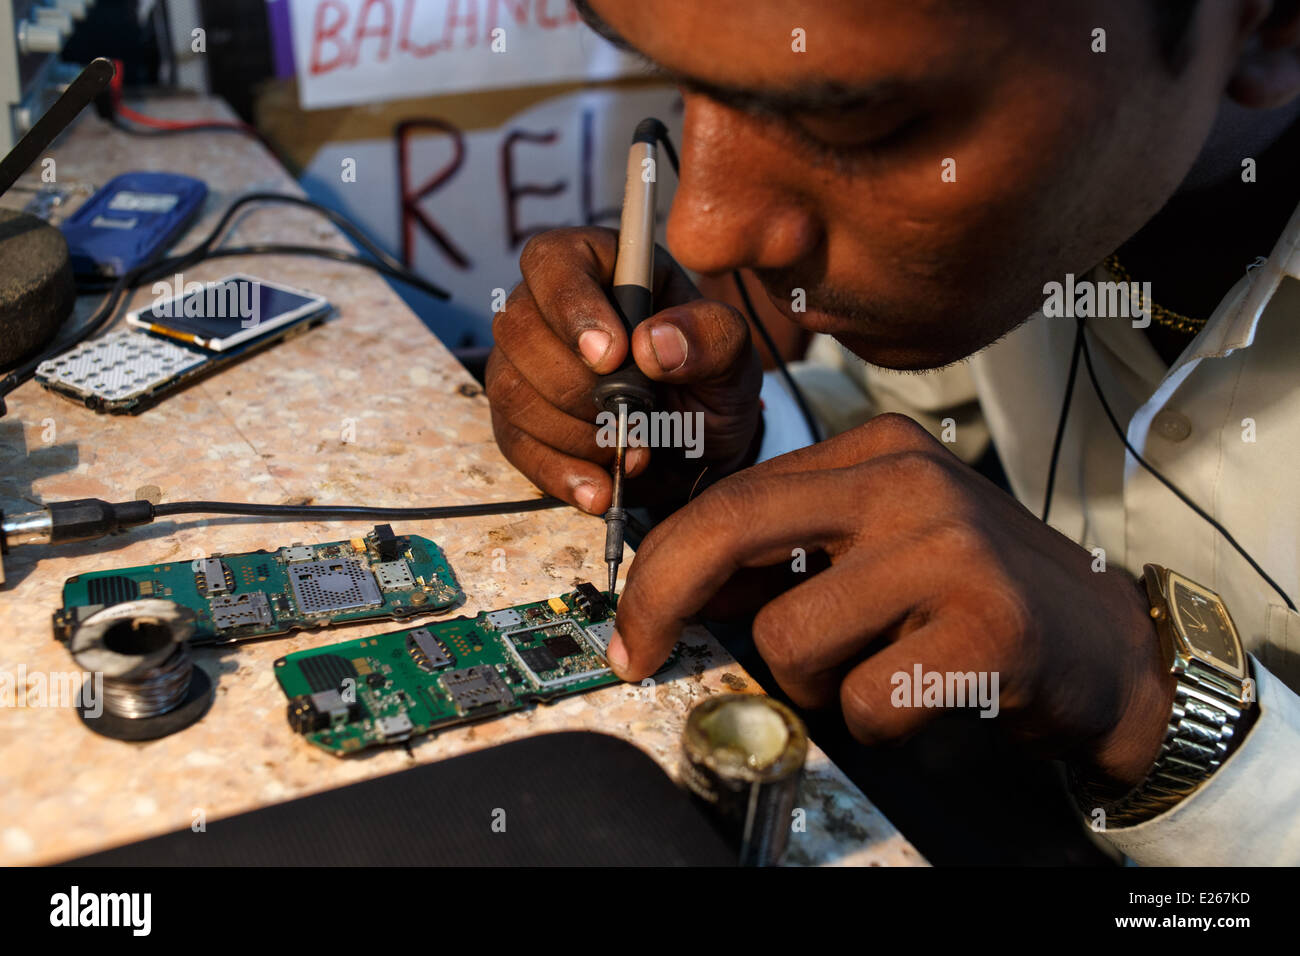 A mobile phone (cellphone) shop and repair workshop in Mumbai, India. Stock Photo